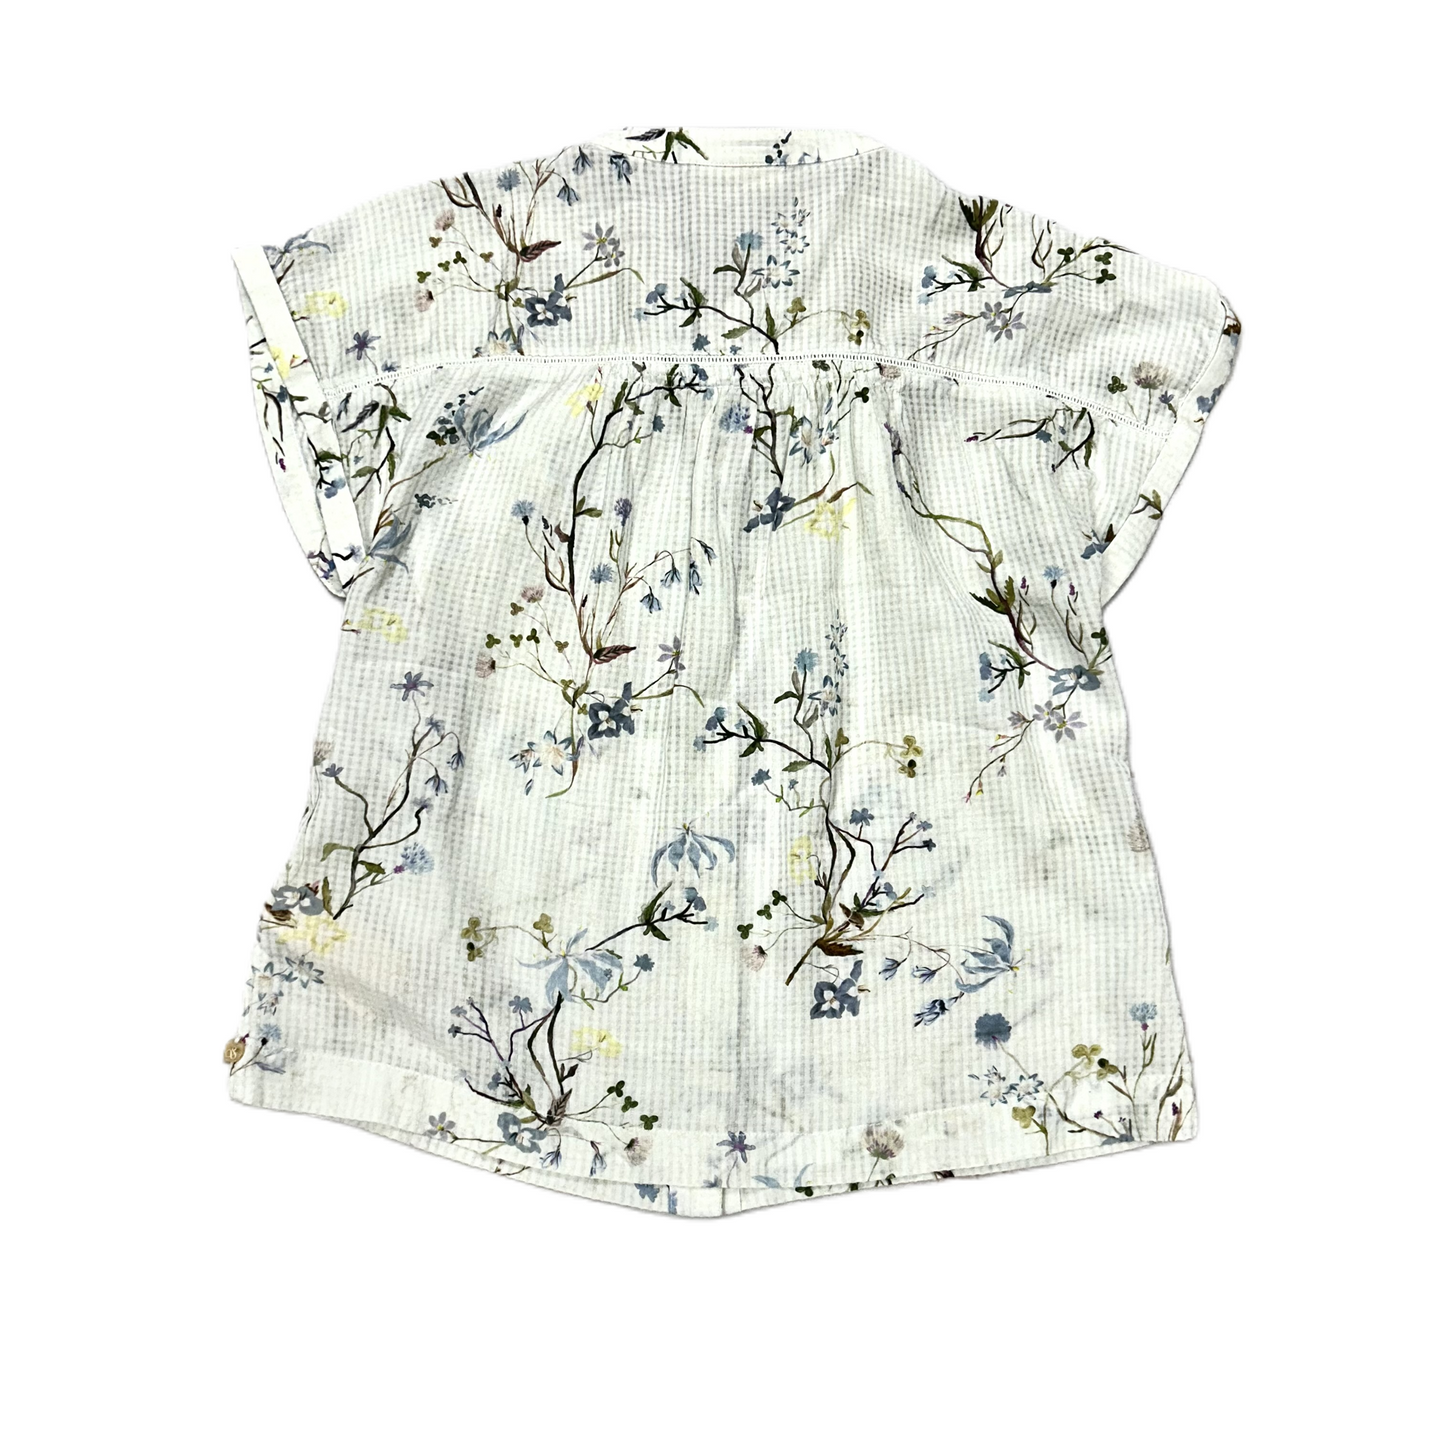 Floral Print Top Short Sleeve Designer By Scotch & Soda, Size: S